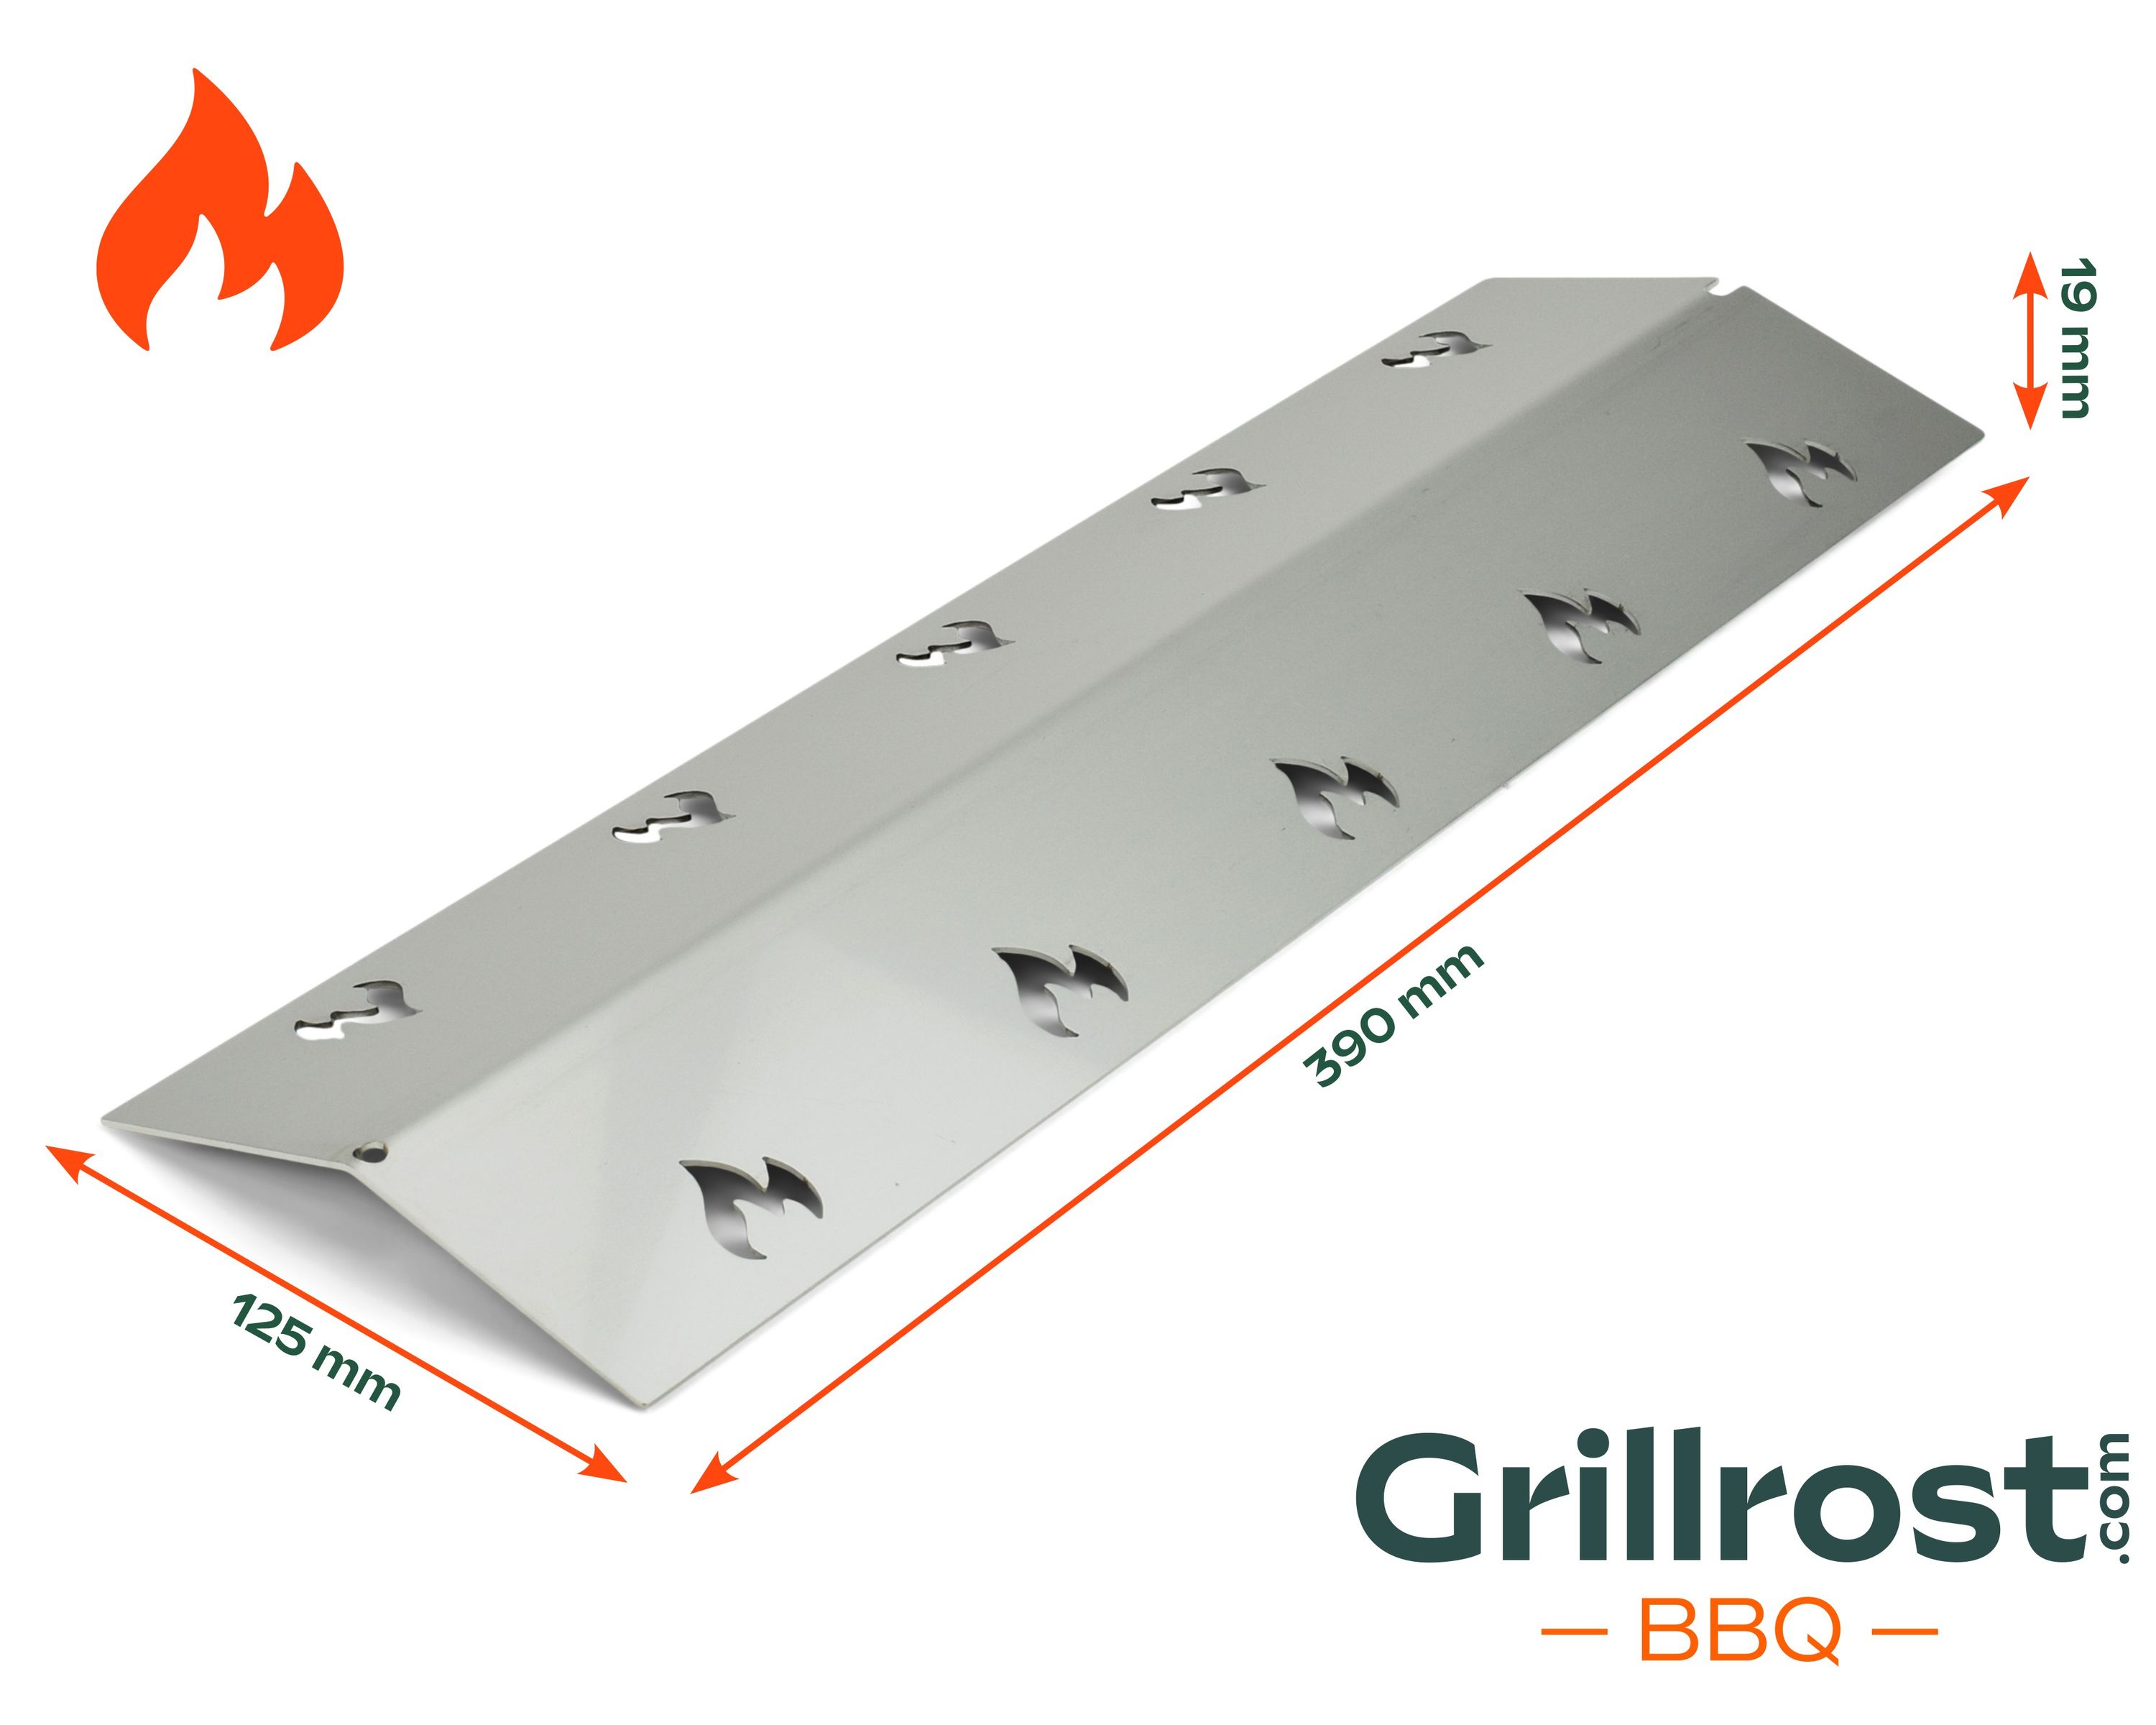 Stainless steel burner cover 39 x 12.5 cm Replacement aroma rail outlives your barbecue